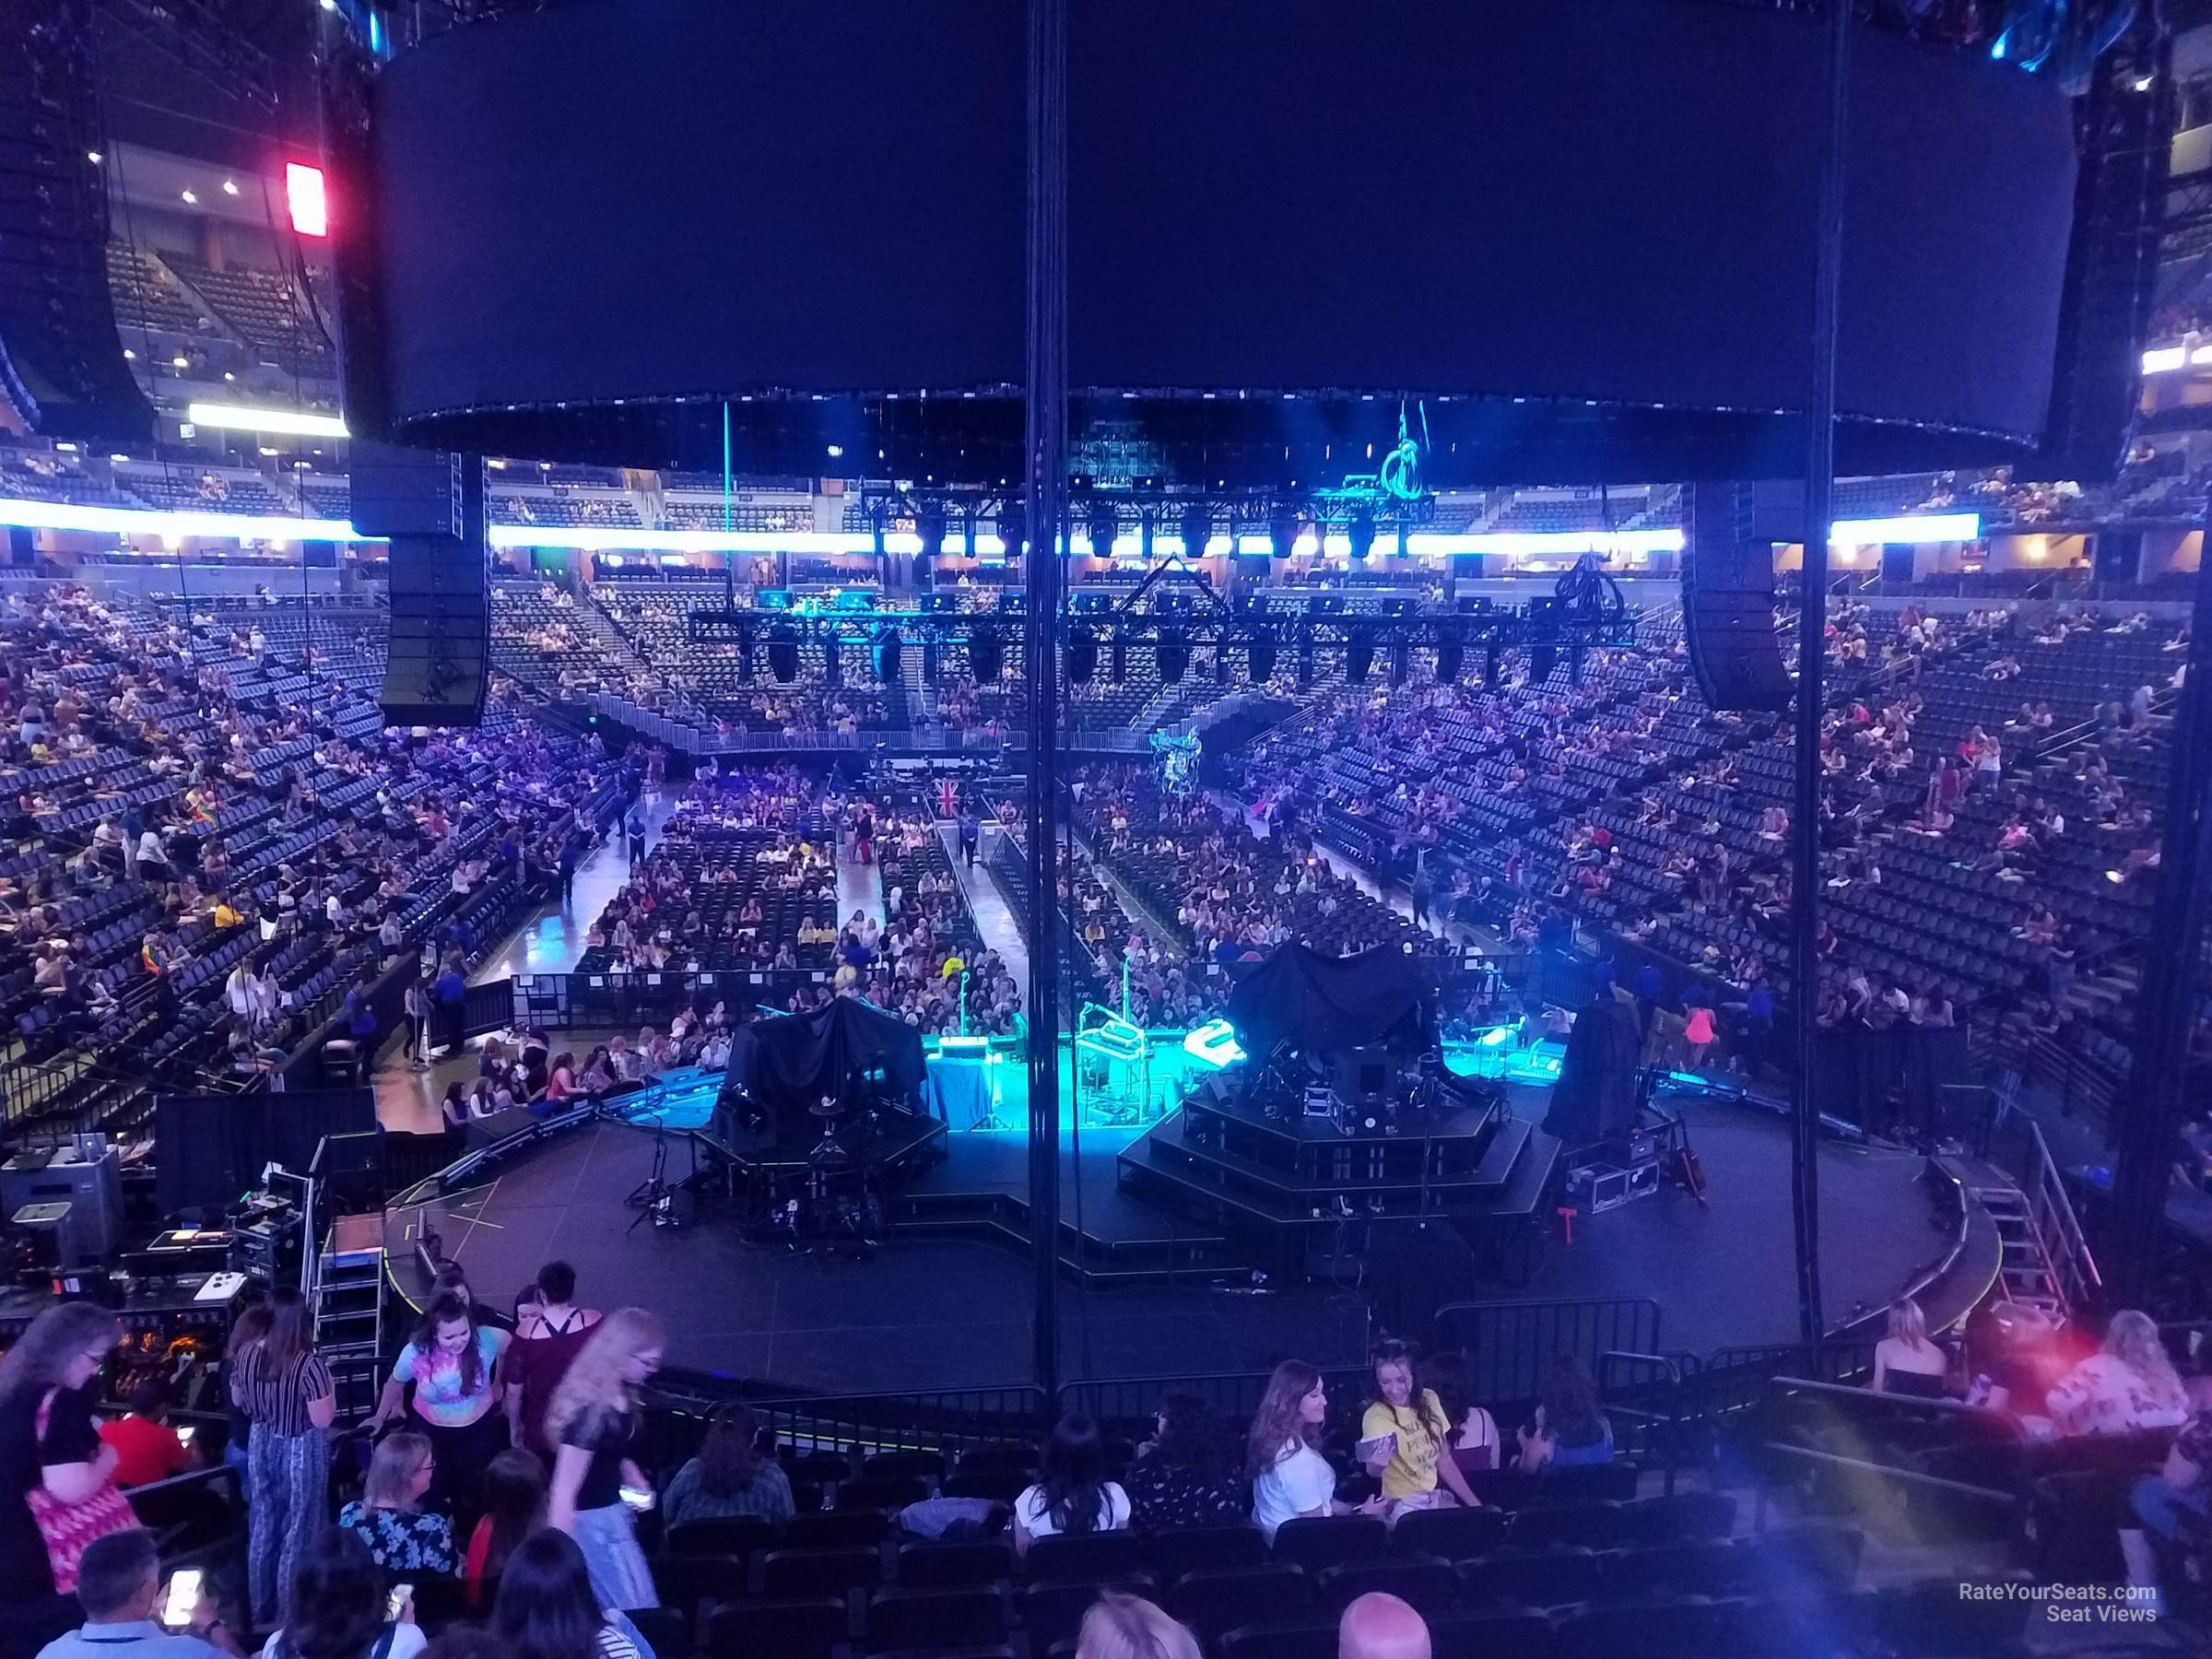 section 138, row 19 seat view  for concert - ball arena